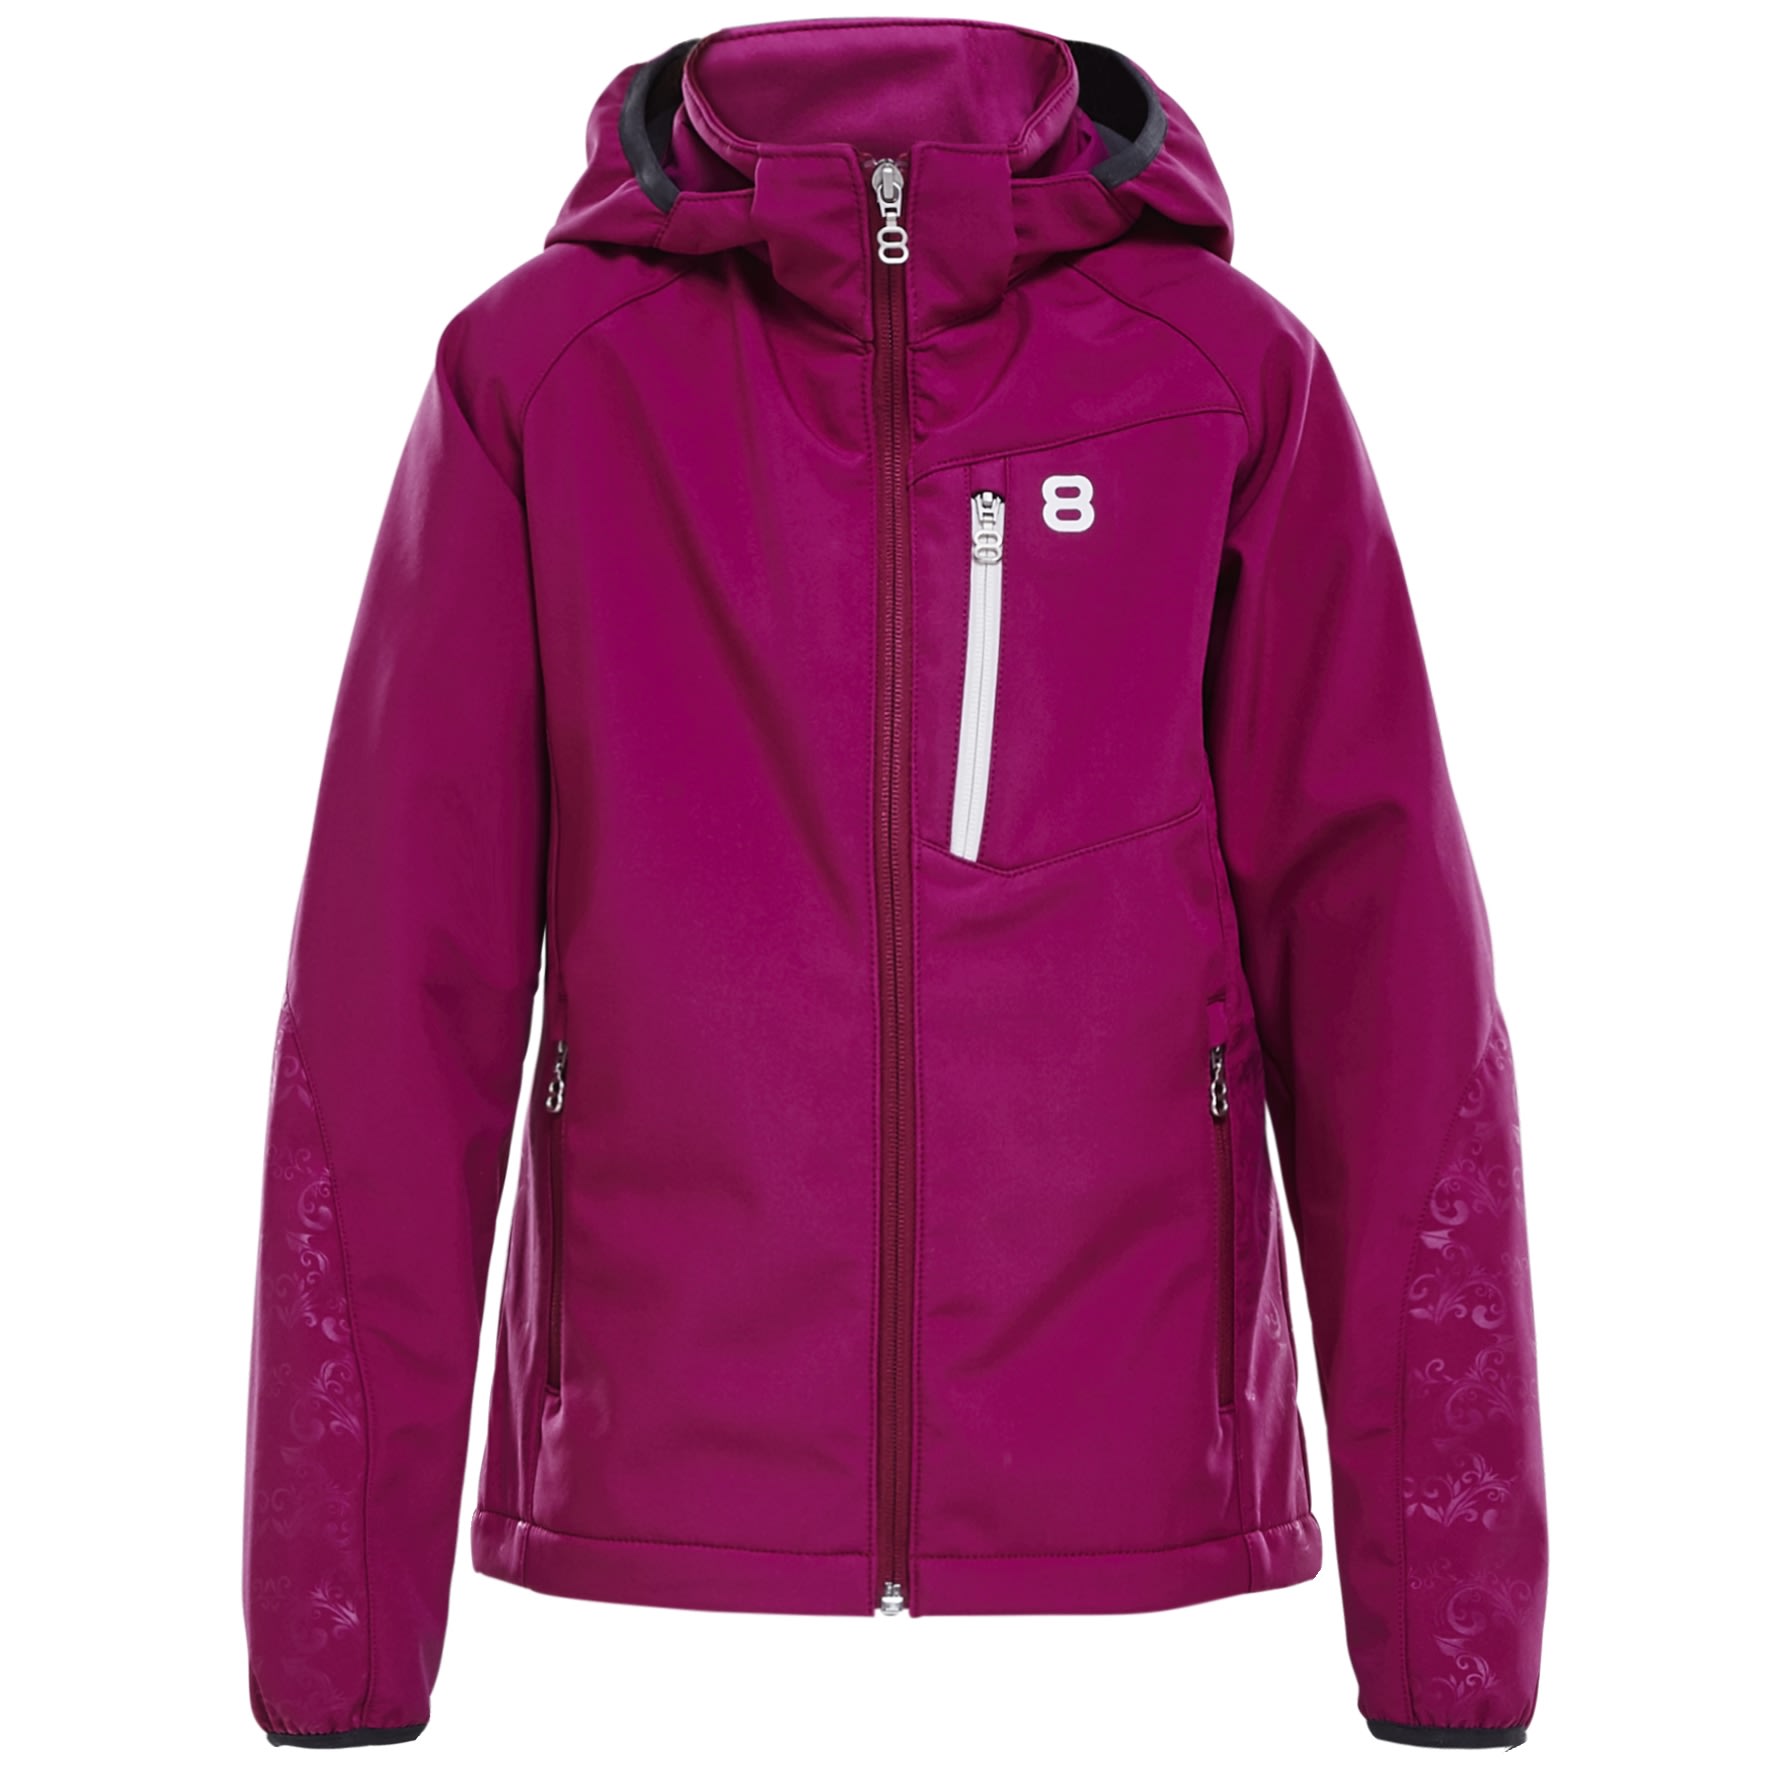 feit Spanje Laatste Buy 8848 Altitude Castie Jr Softshell from Outnorth